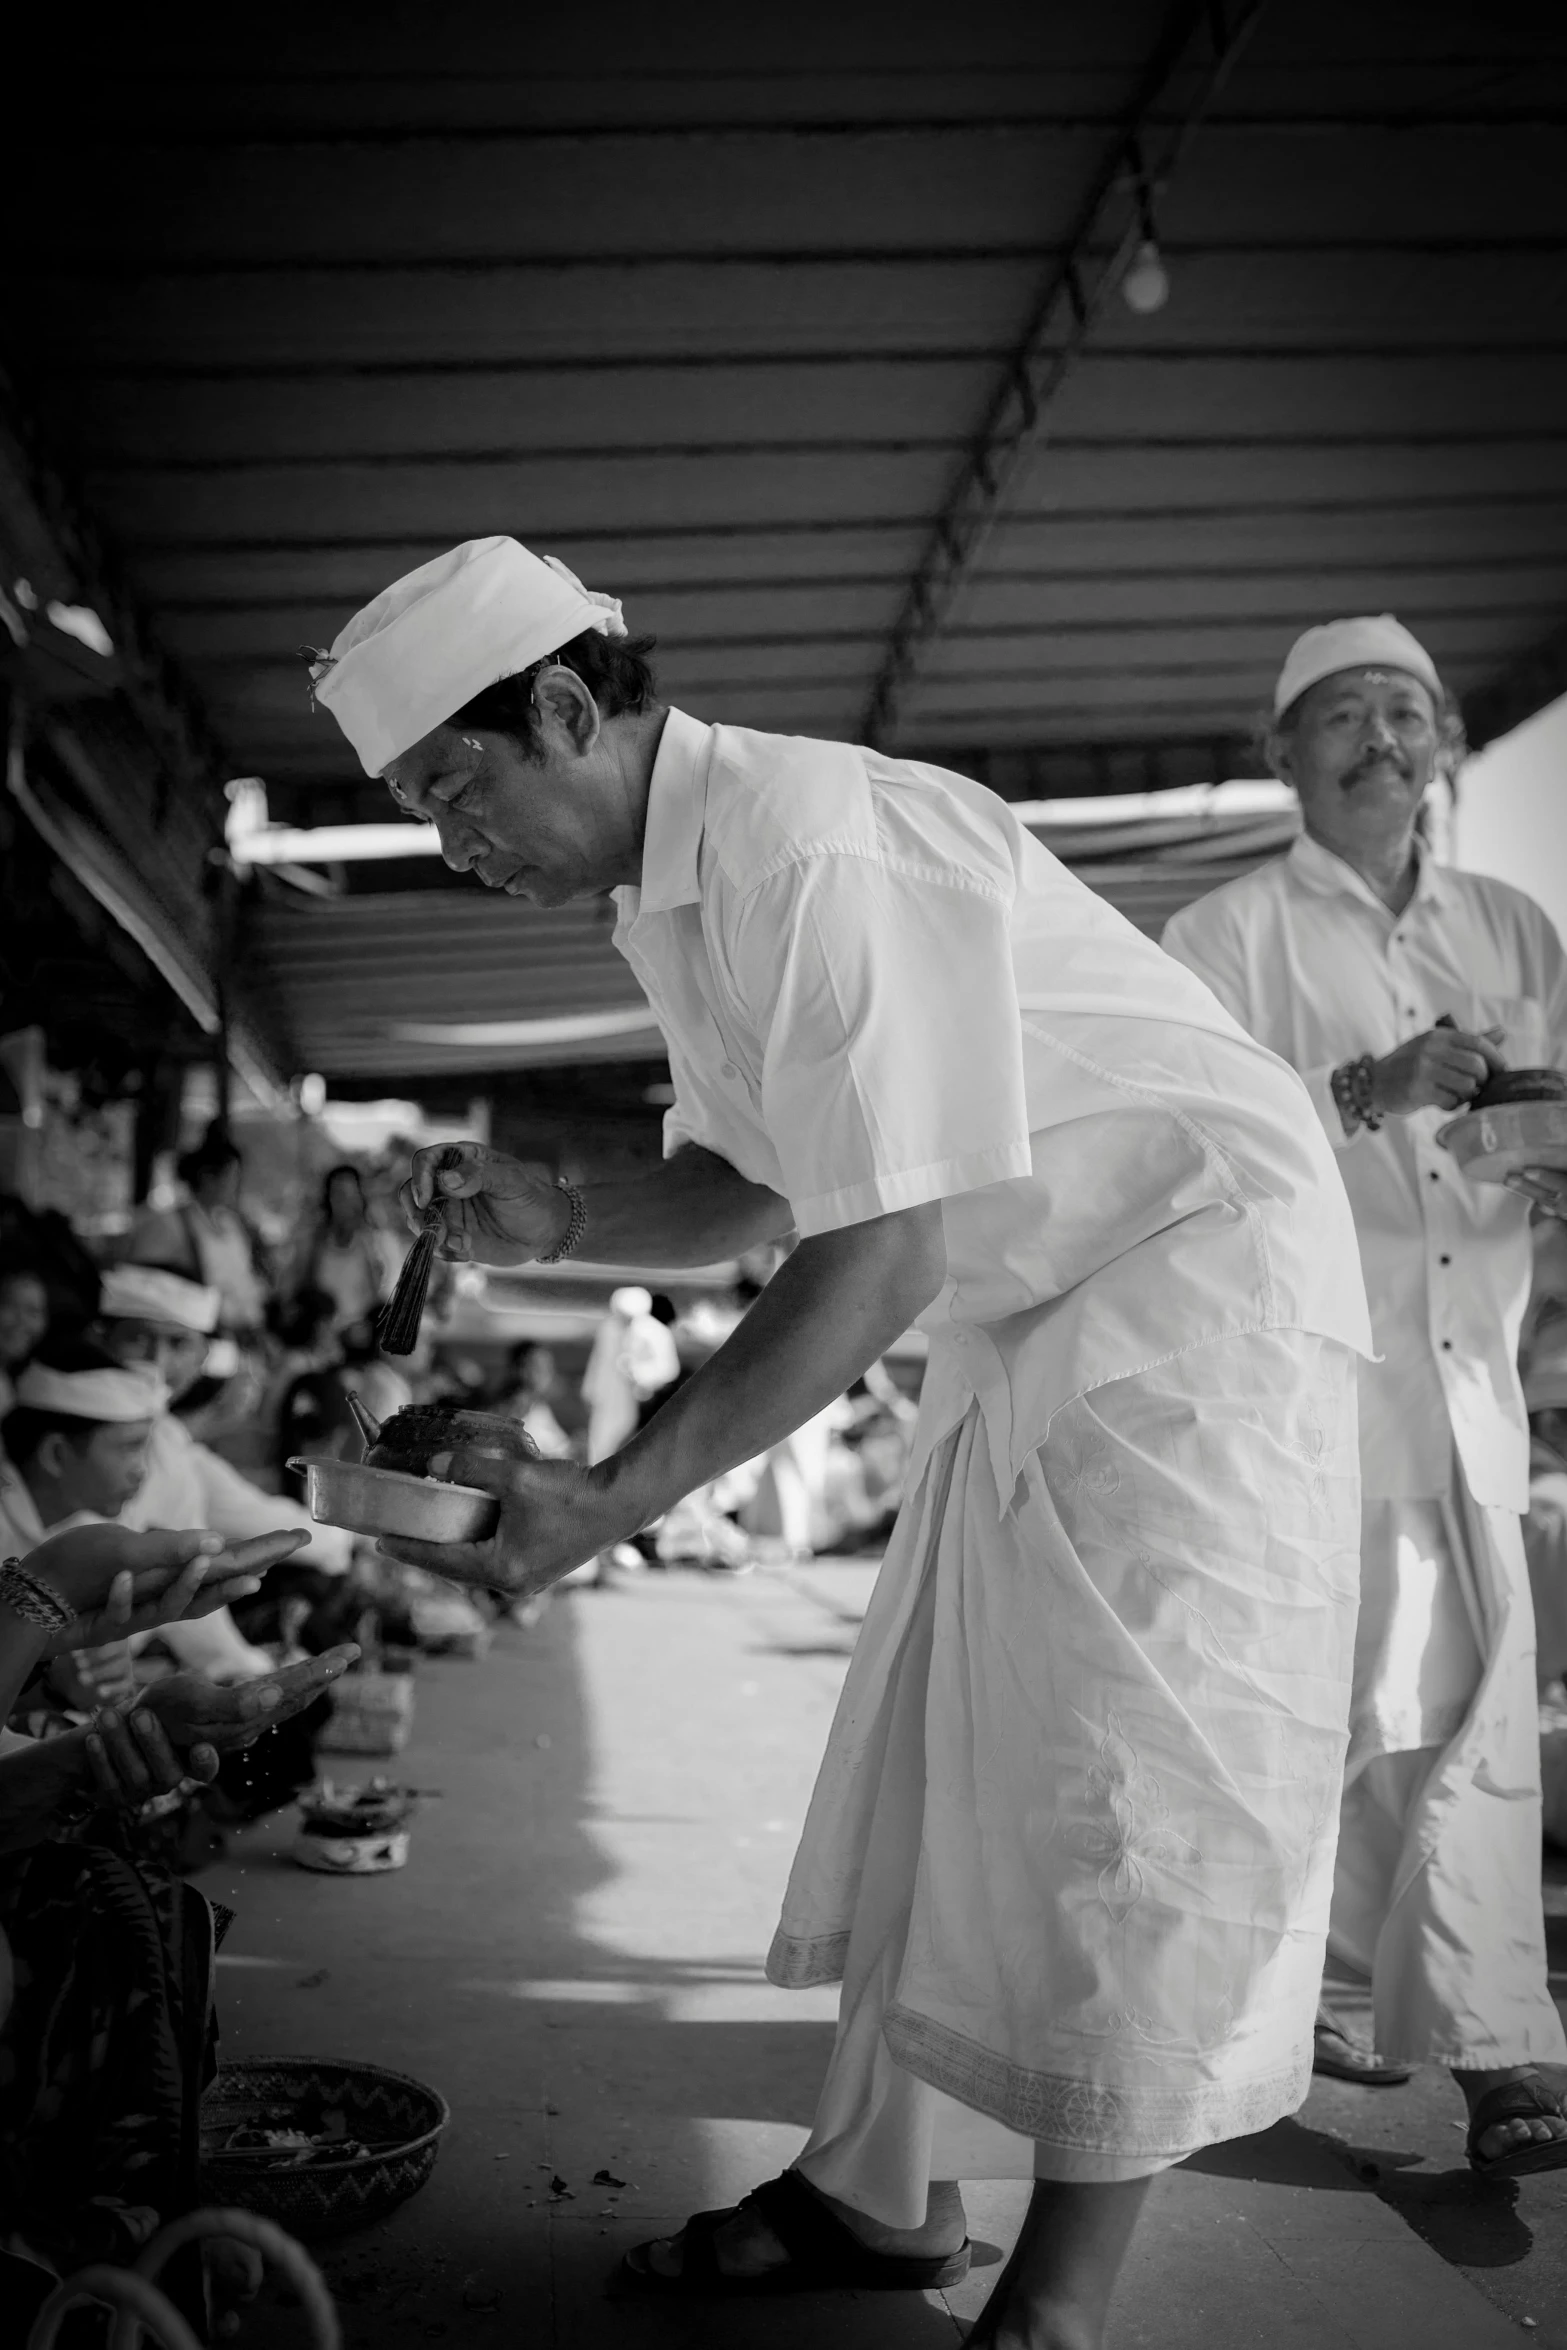 two men in chef uniforms preparing food on plates